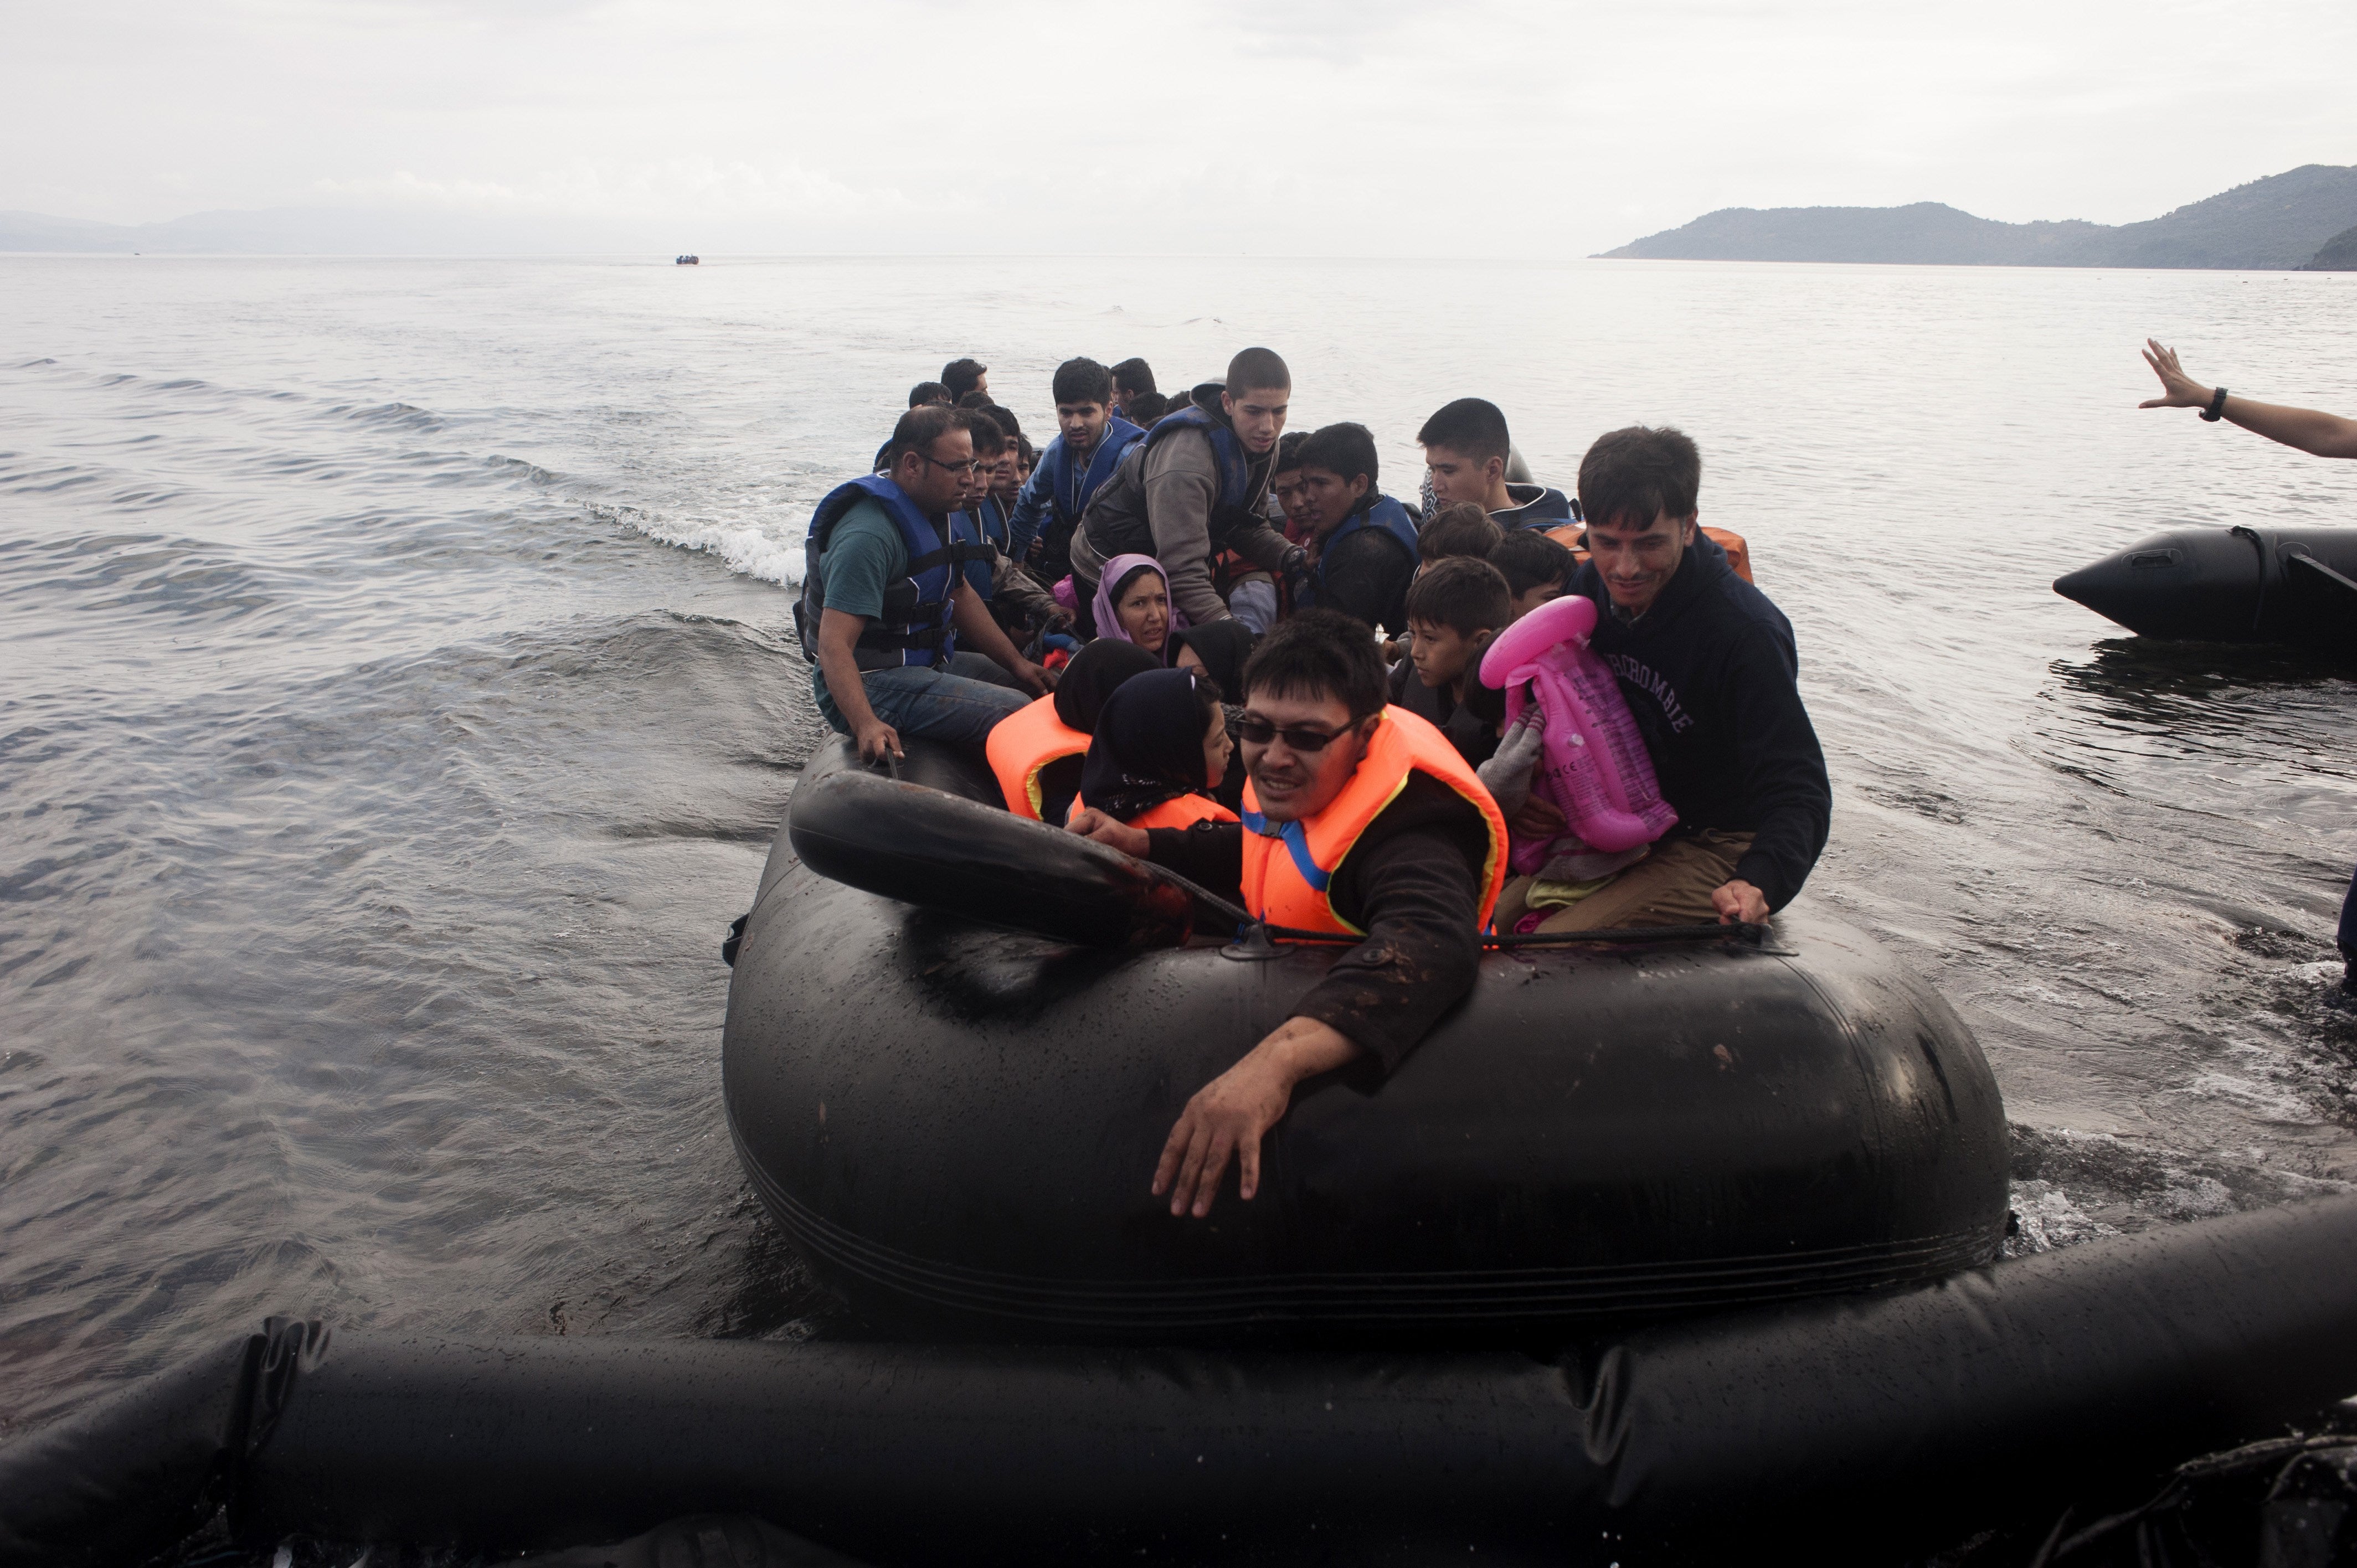 Refugees arrive on the Greek island of Lesbos, after crossing the Aegean sea from Turkey